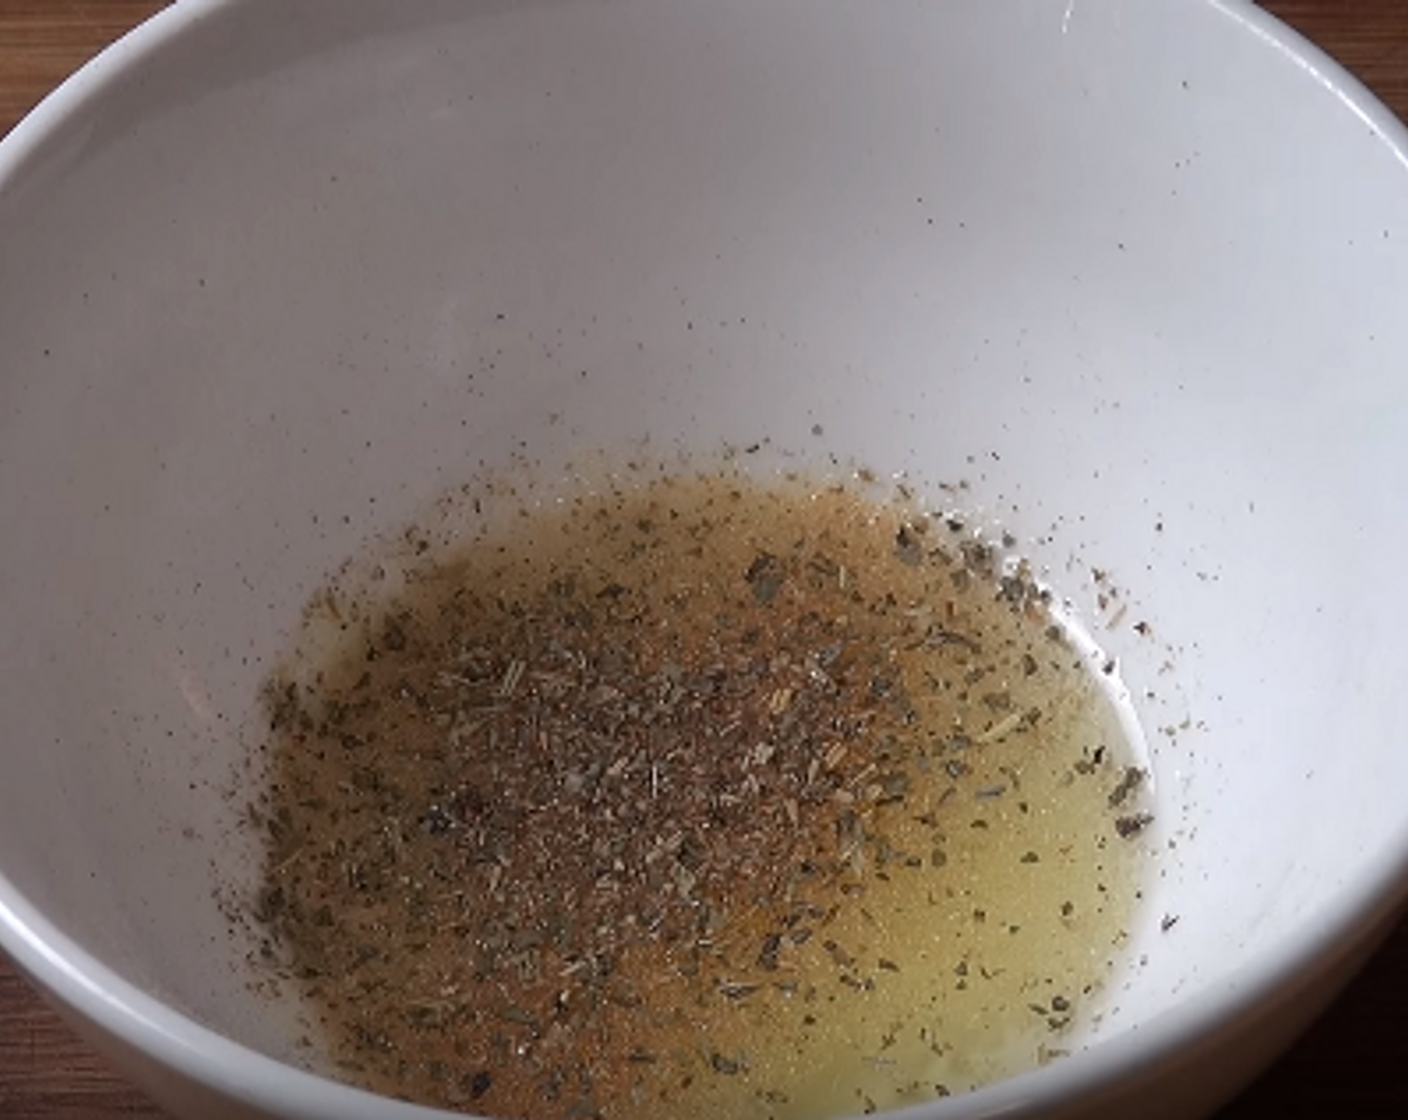 step 2 In a small bowl or cup, add Olive Oil (2 Tbsp), Garlic Powder (1 dash), Onion Powder (1 dash), and some Dried Mixed Herbs (to taste). Mix well.